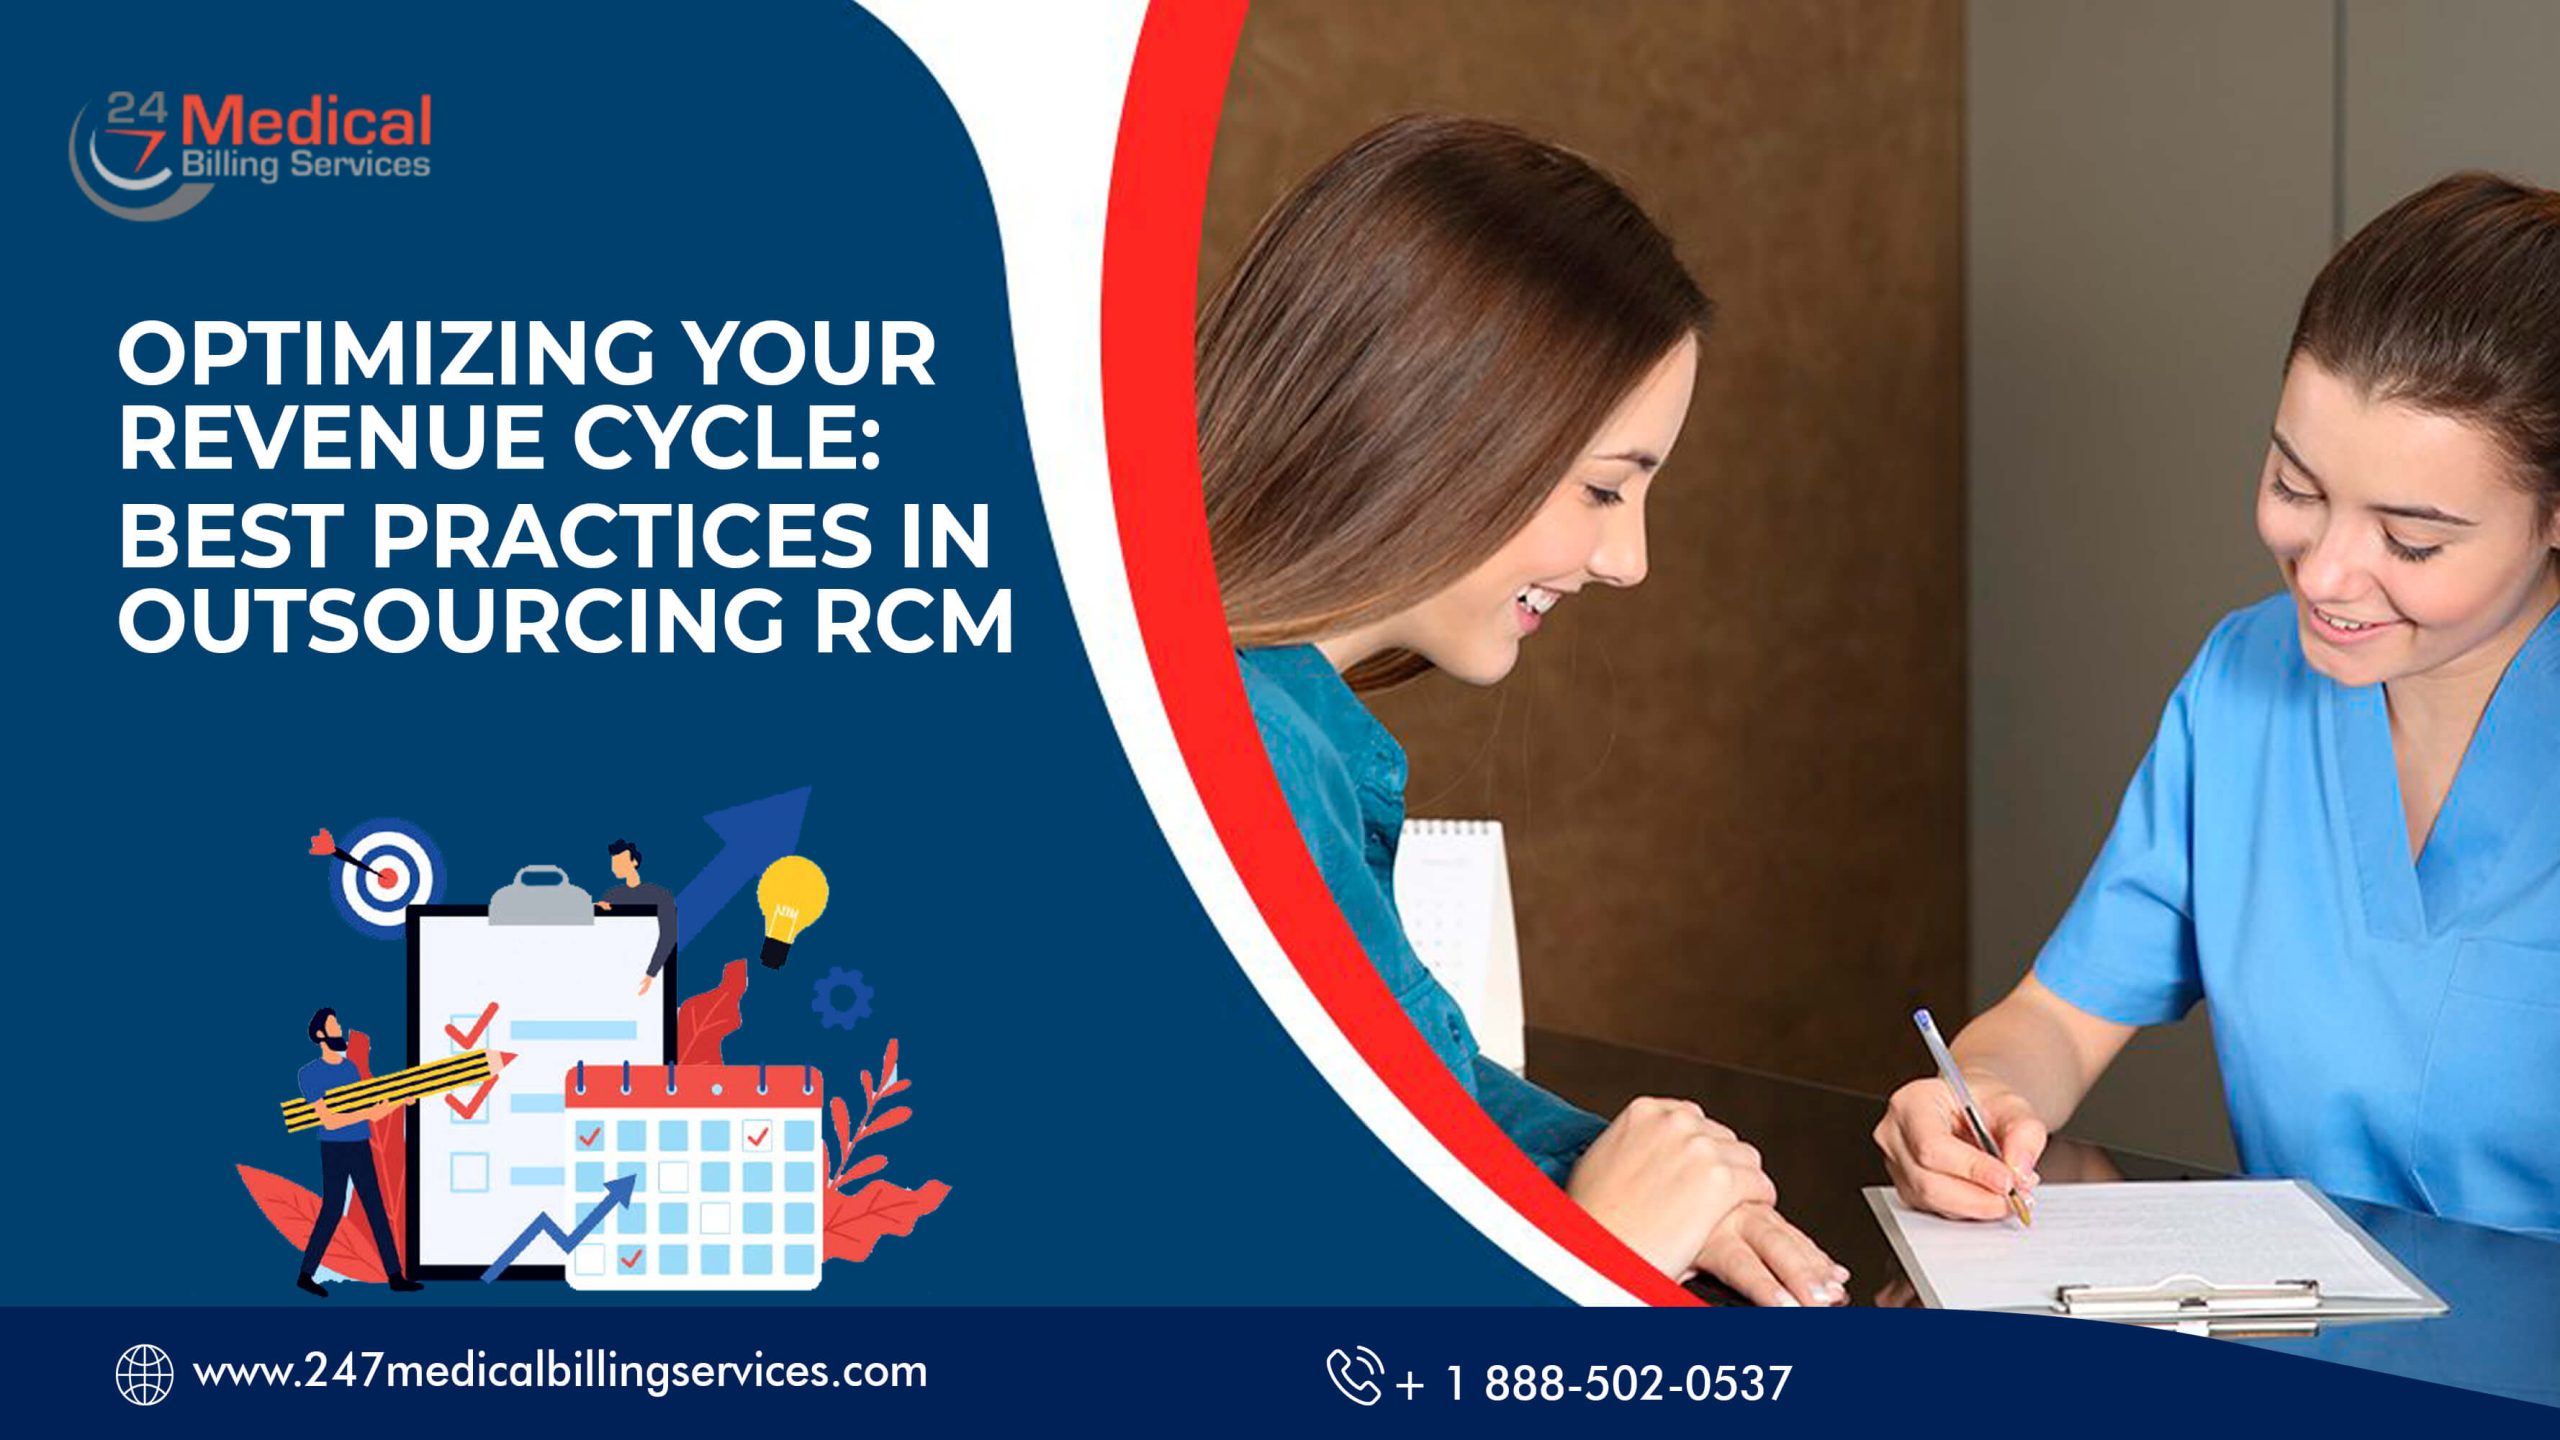  Optimizing Your Revenue Cycle: Best Practices in Outsourcing RCM